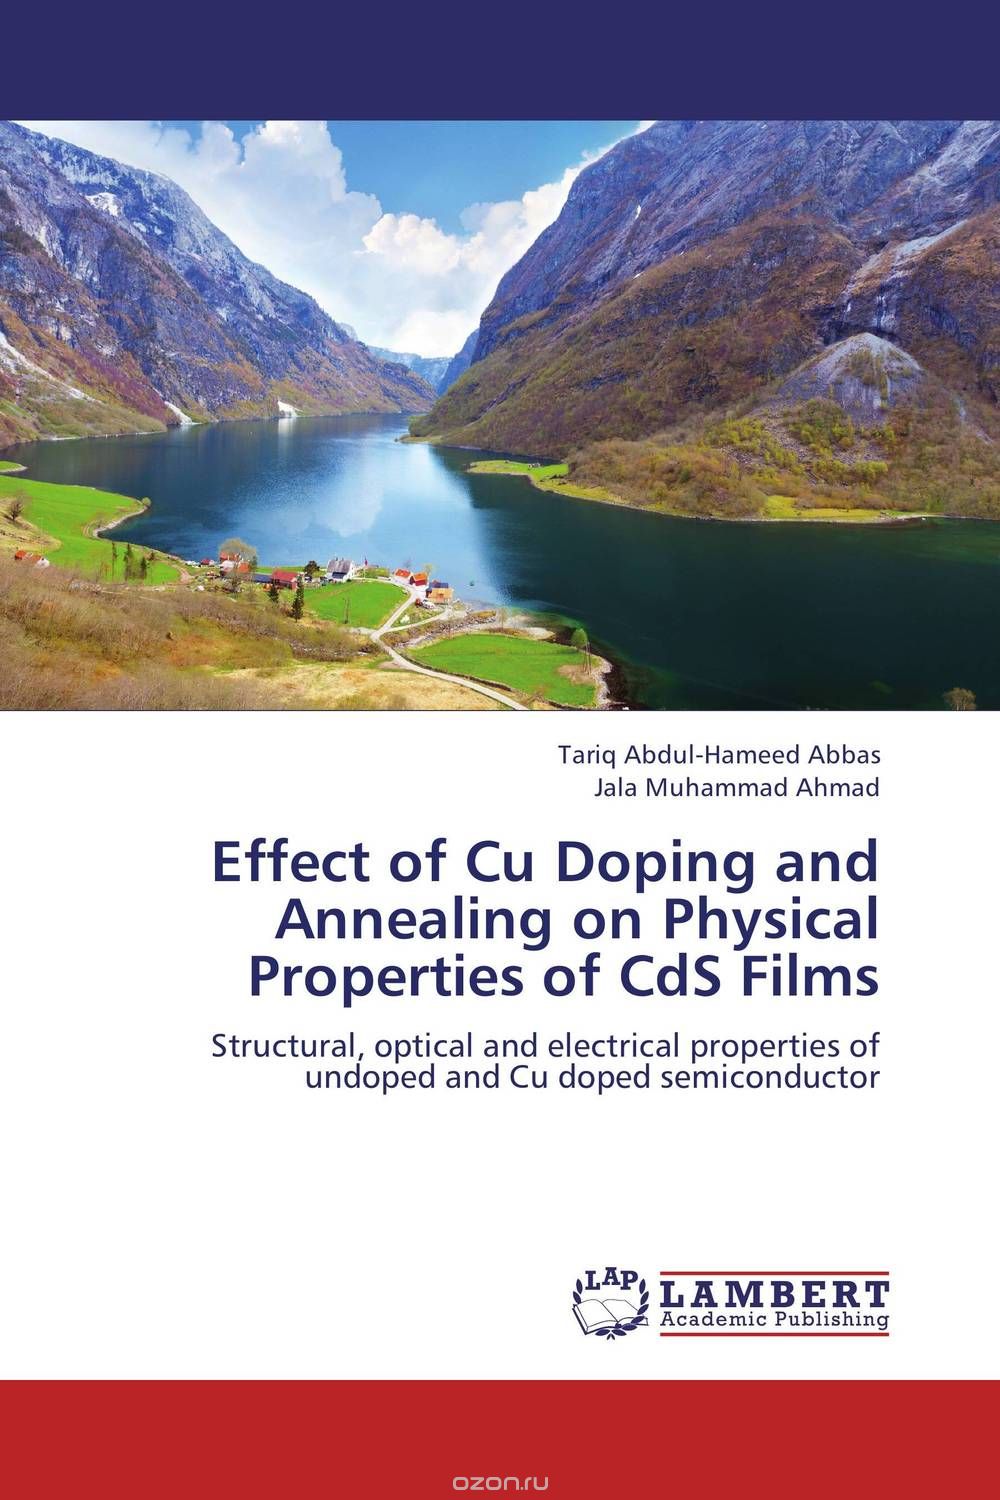 Effect of Cu Doping and Annealing on Physical Properties of CdS Films